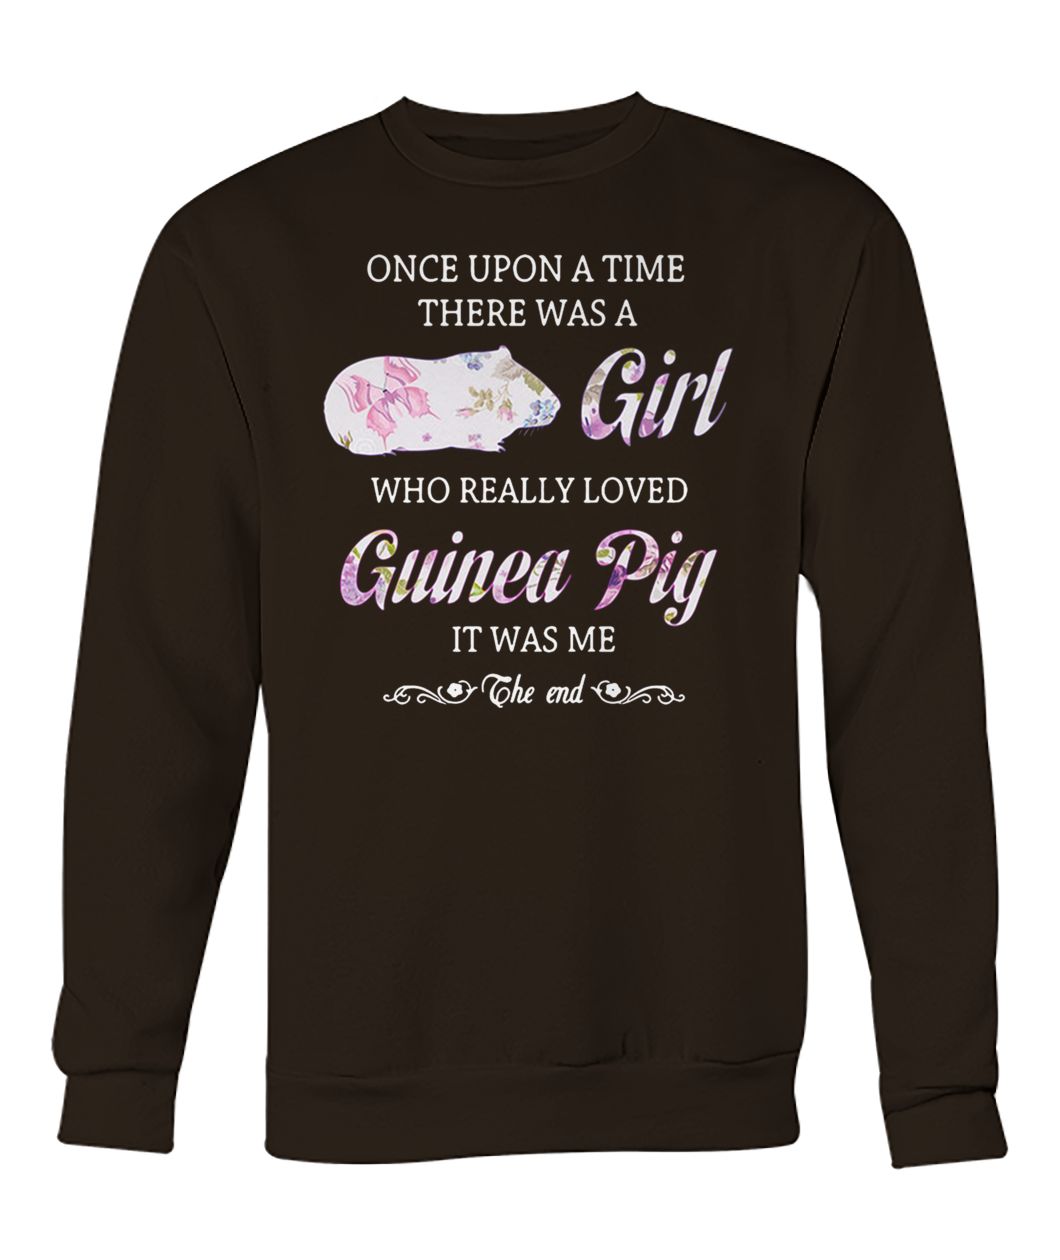 Once upon a time there was a girl who really loved guinea pig it was me the end crew neck sweatshirt